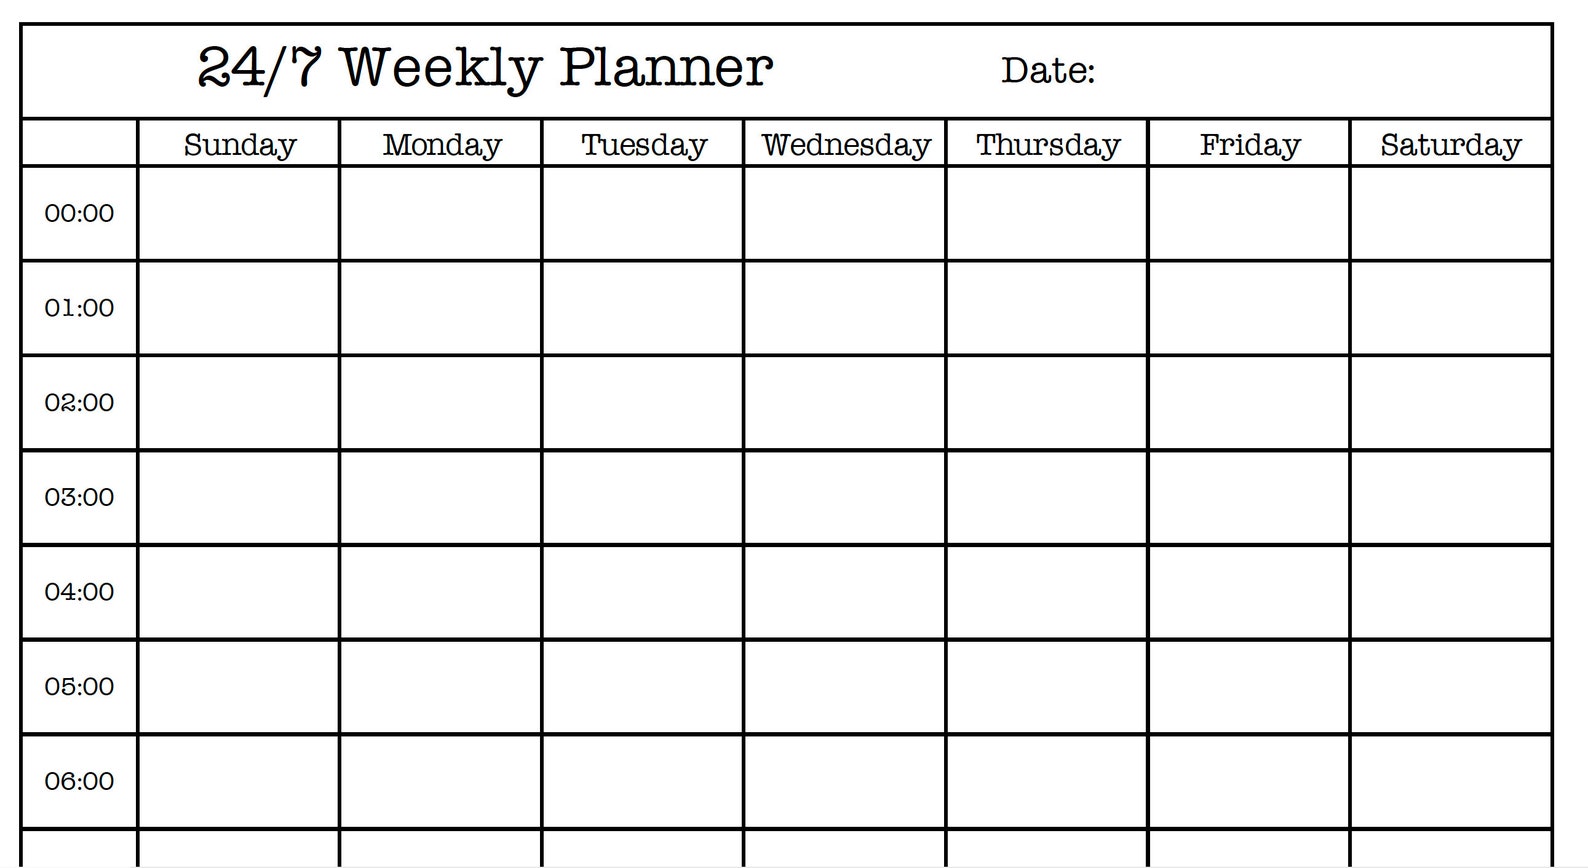 24/7 Weekly Planner Sunday or Monday start | Etsy